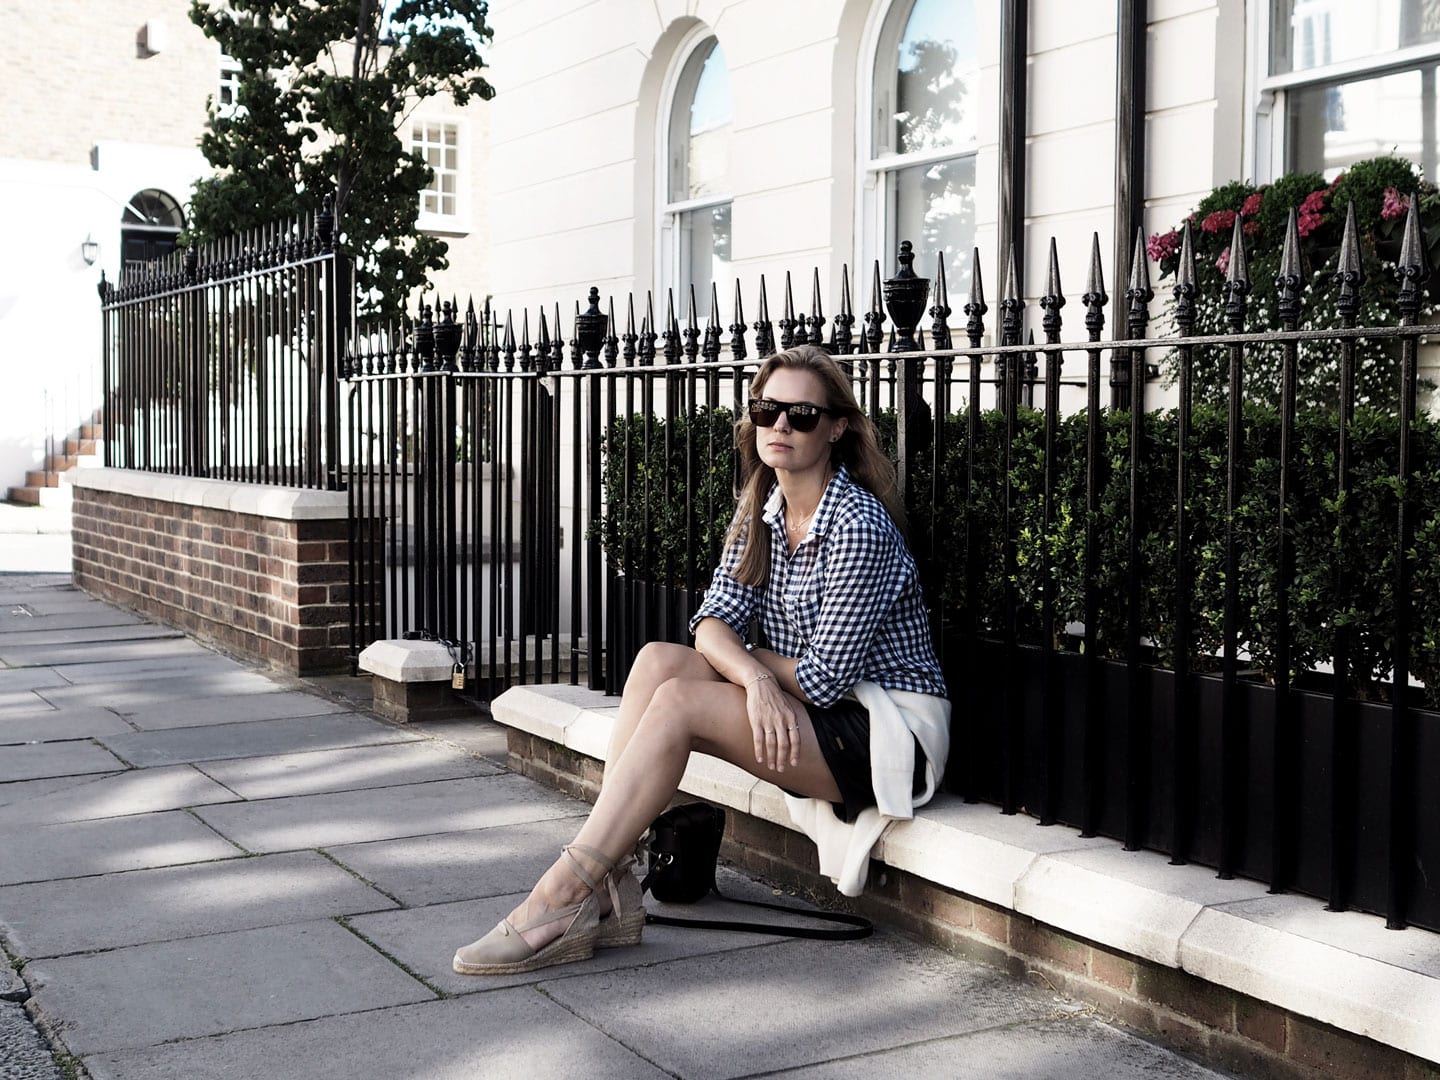 Time Keeping | Custommade Gingham Shirt, Pepe Leather Skirt, Penelope Chilvers Espadrilles